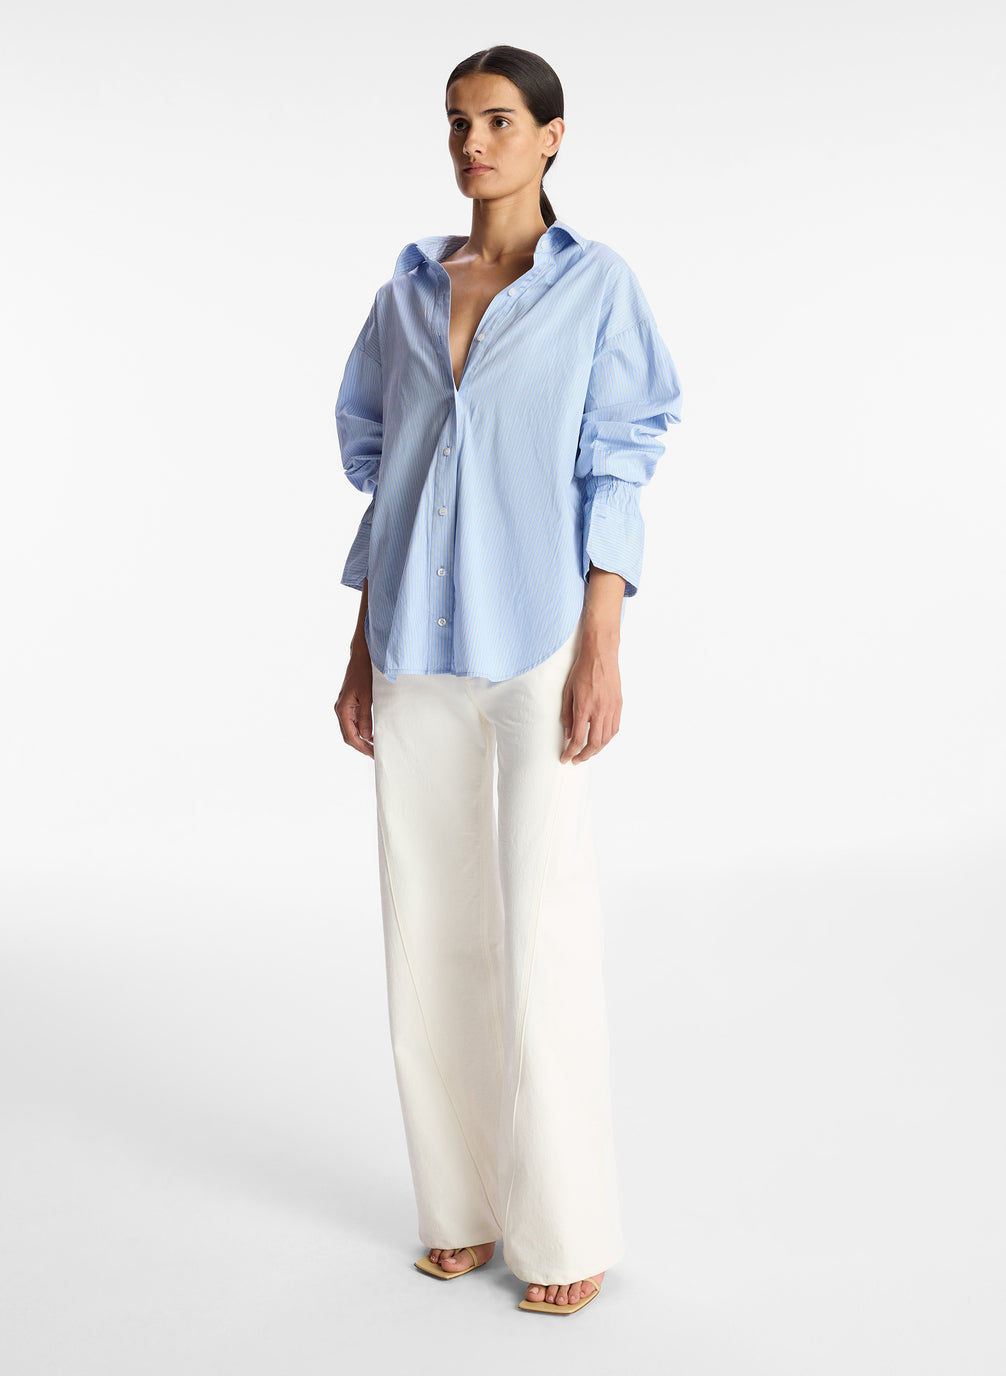 ALC Monica Top in chelsea blue and white from The New Trend